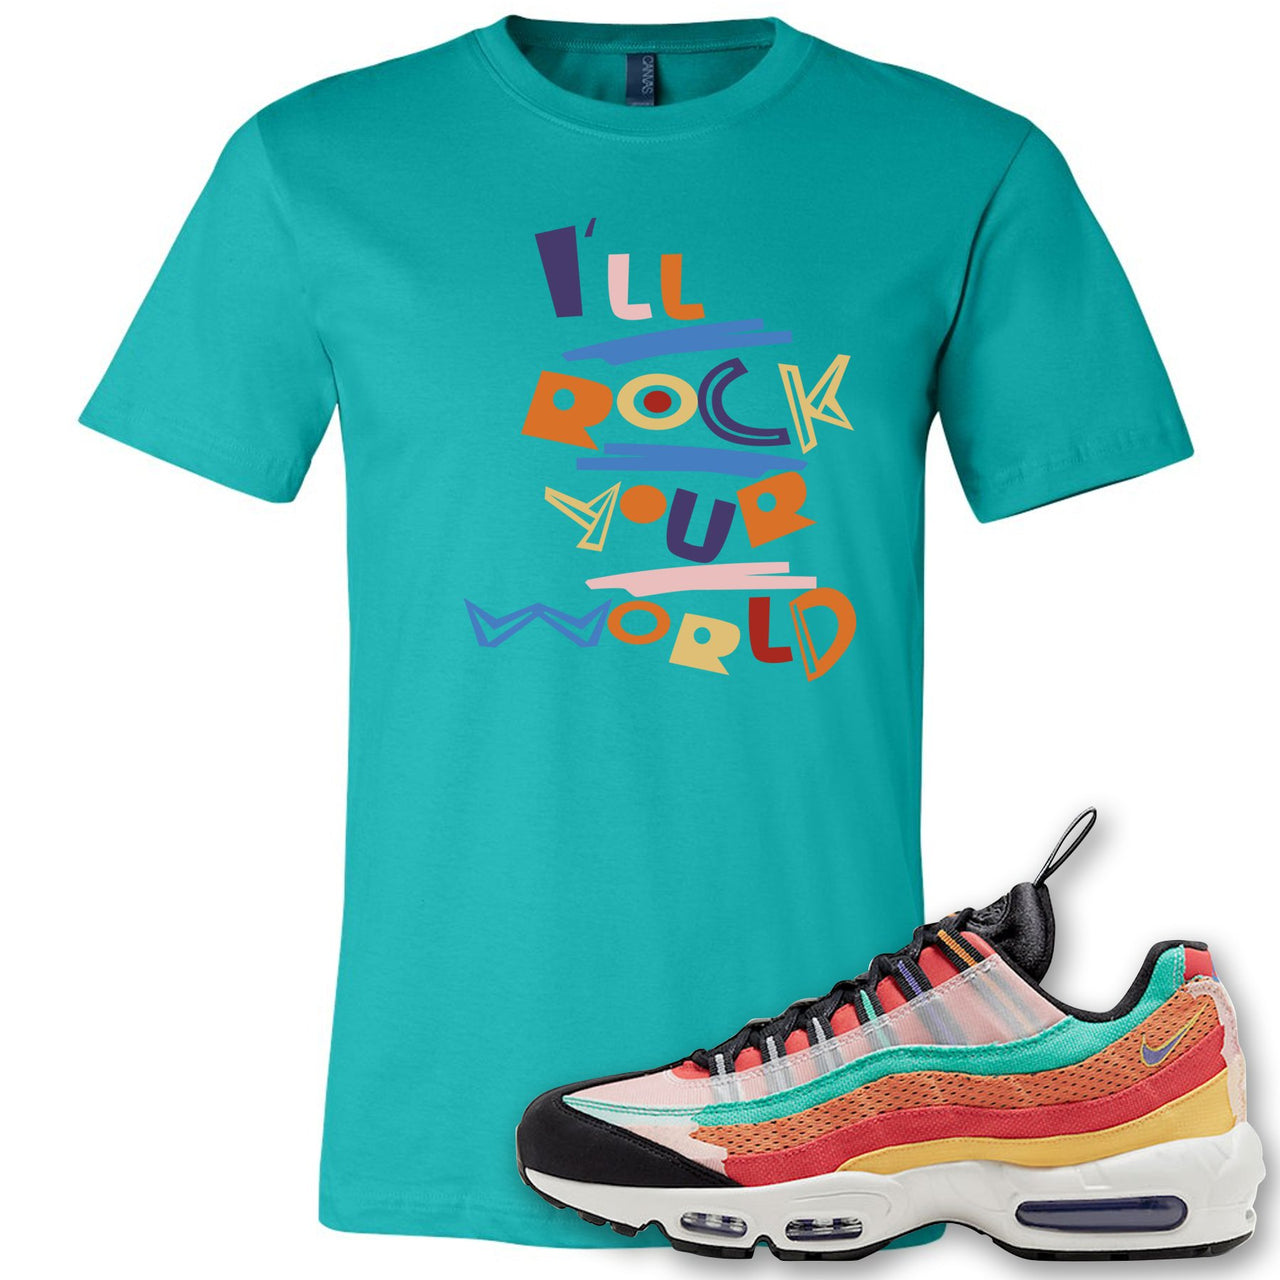 Air Max 95 Black History Month Sneaker Antique Jade Dome T Shirt | Tees to match Nike Air Max 95 Black History Month Shoes | I'll Rock Your World